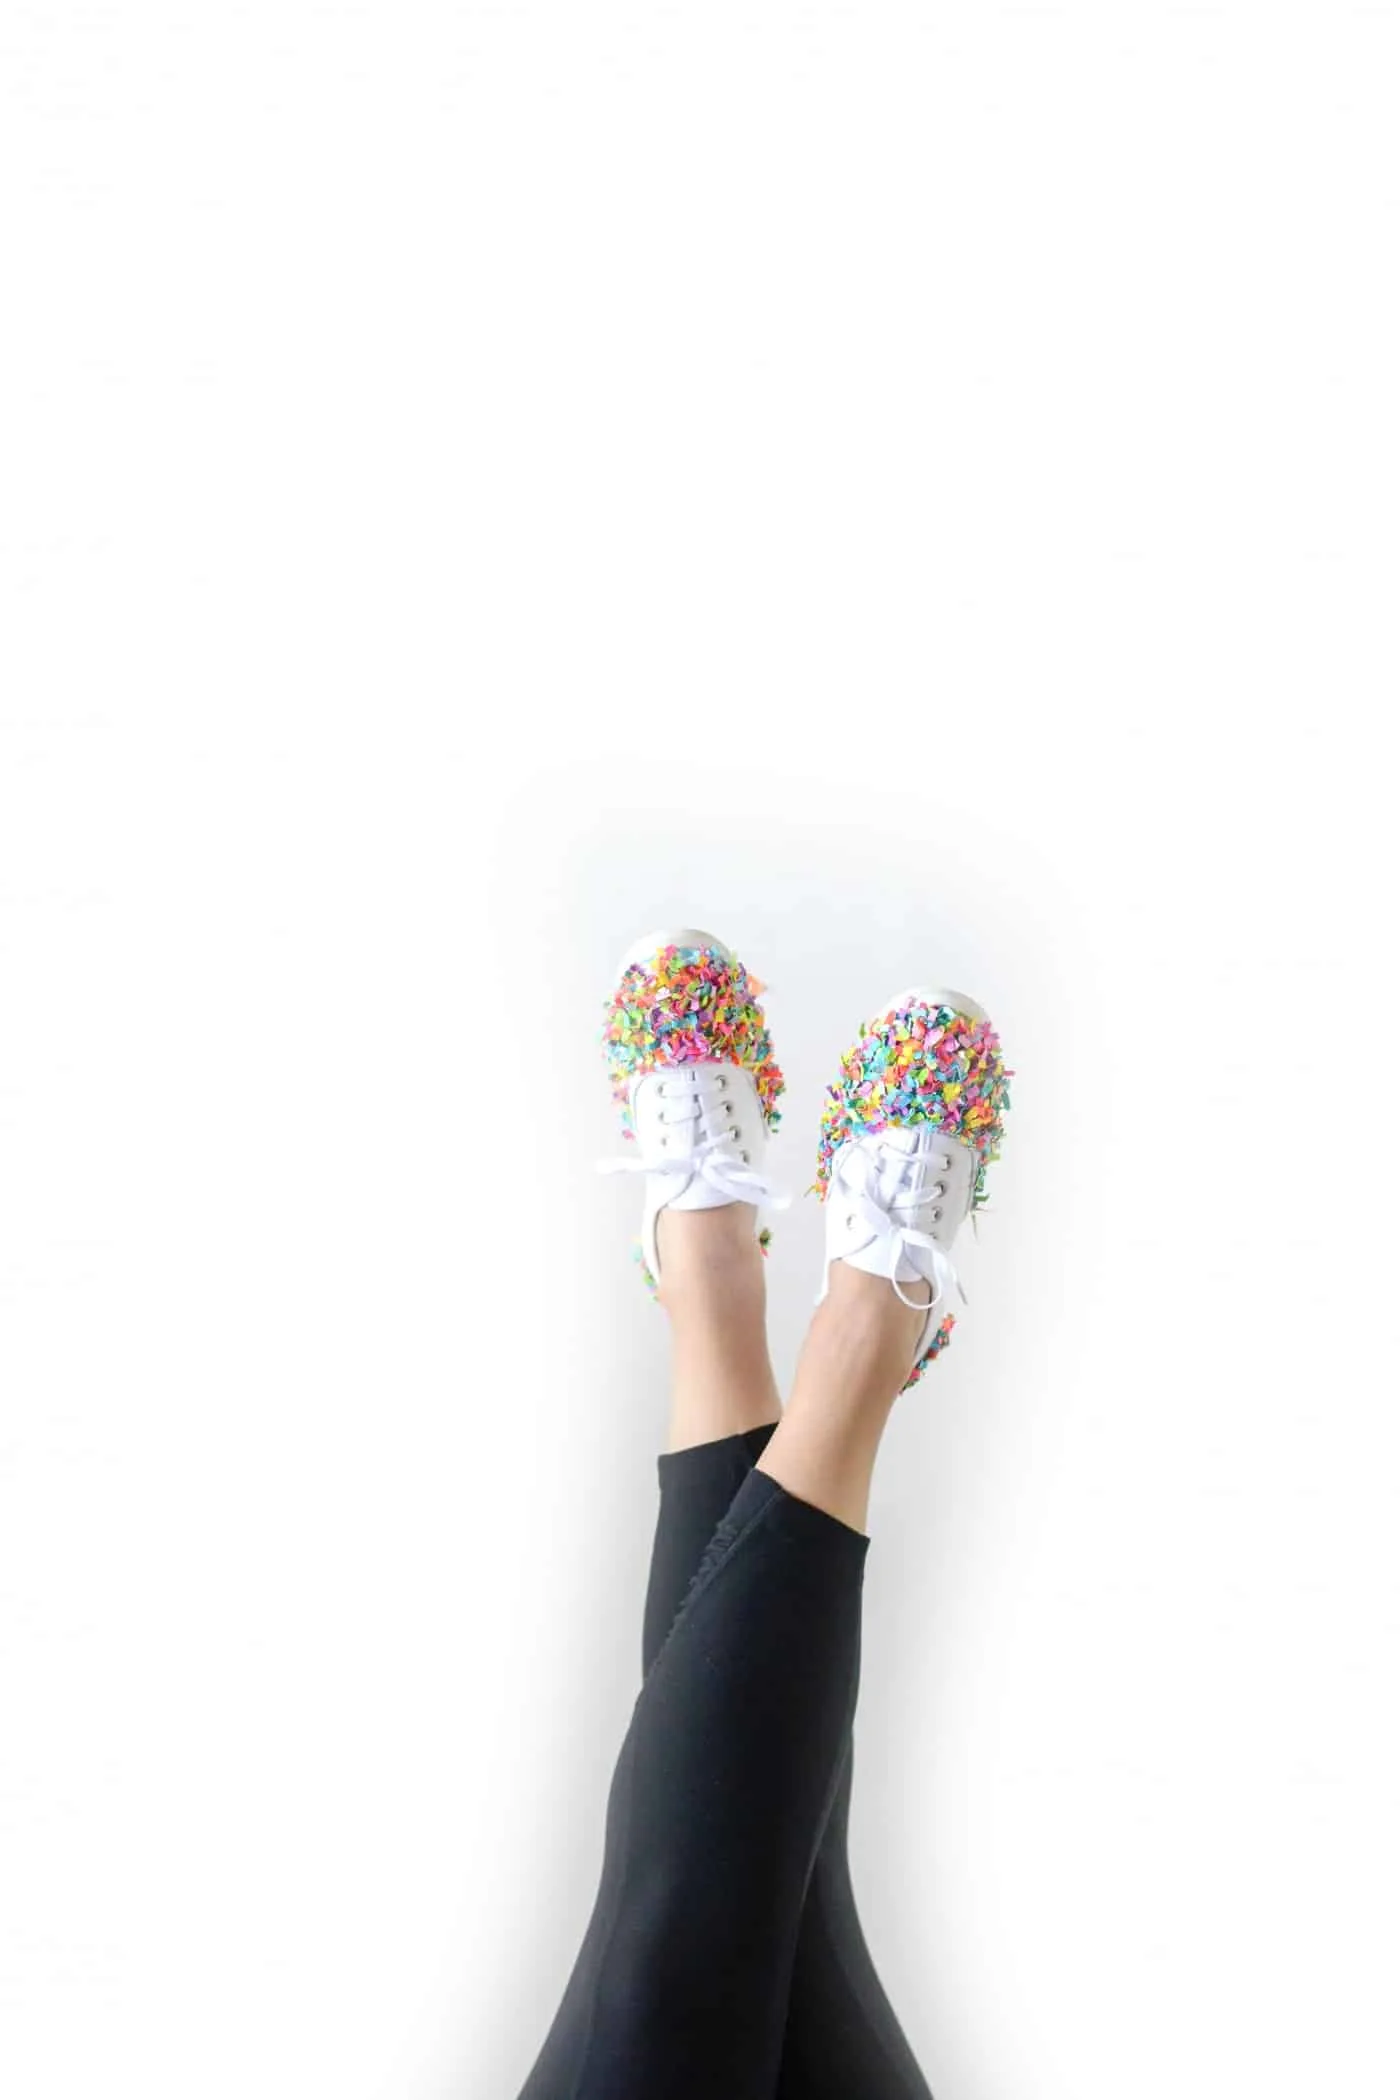 Woman's legs sticking up in the air wearing confetti shoes